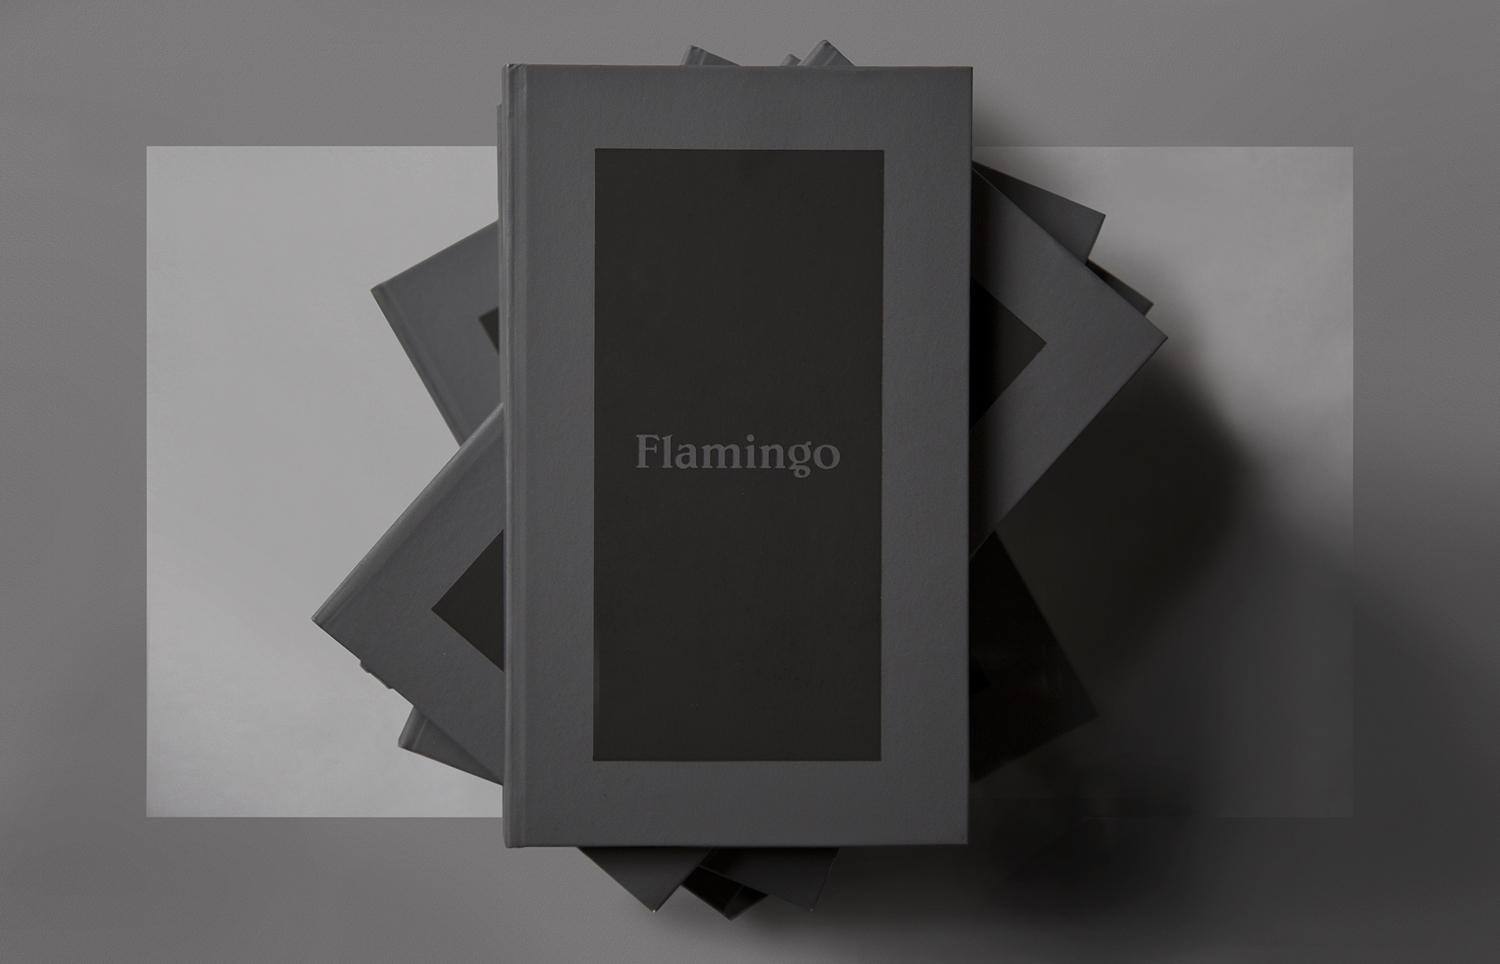 Brand Identity and book cover for Flamingo by Bibliotheque, United Kingdom